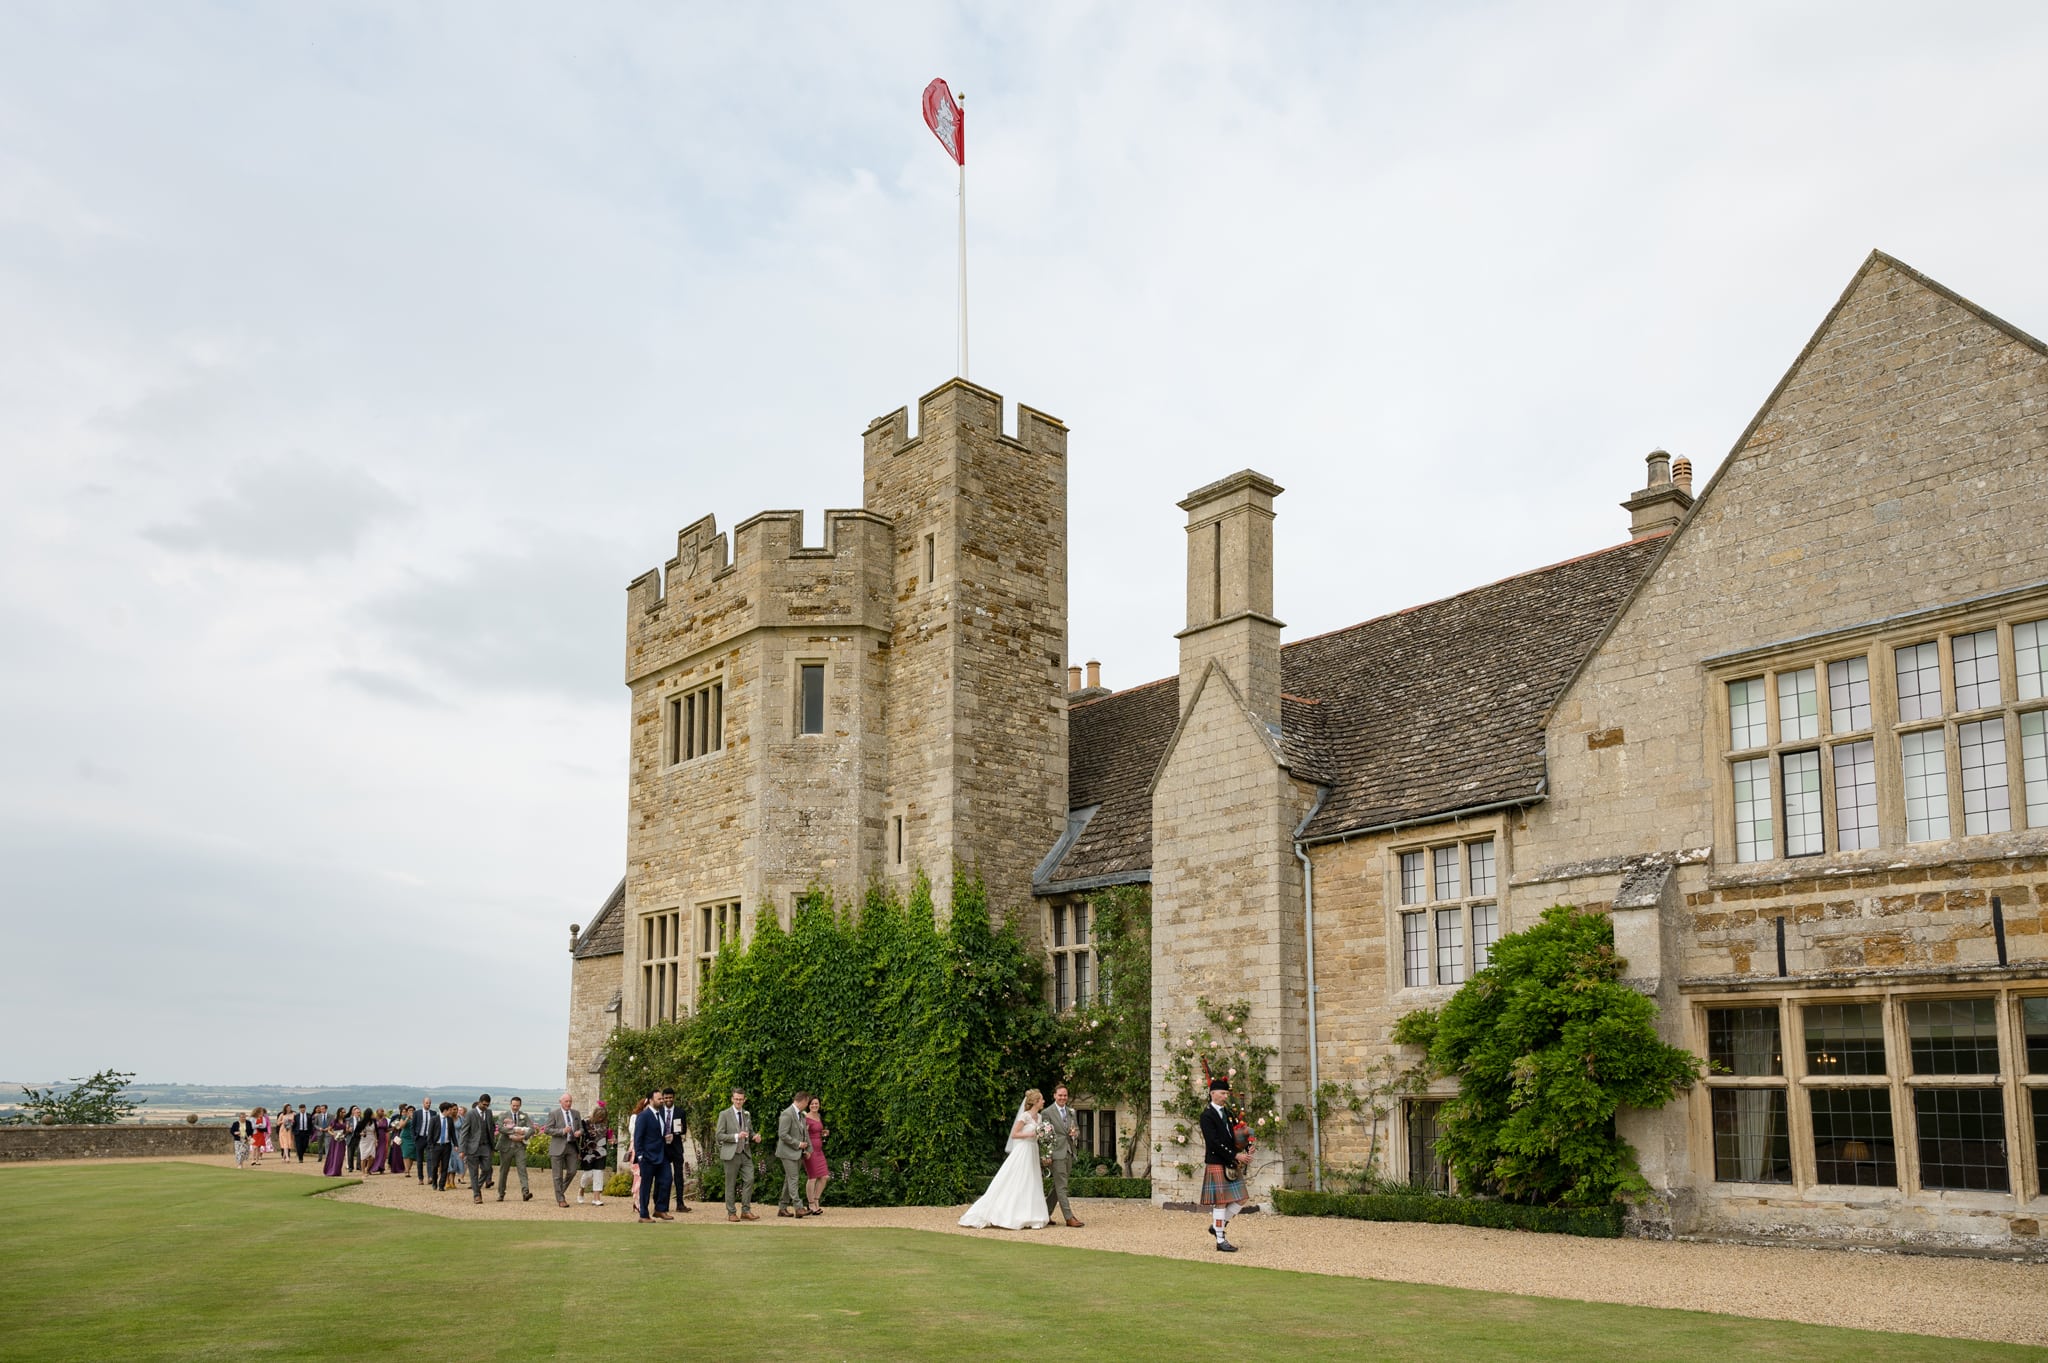 A Scottish bagpiper leading the bride and groom and their guests onto the lawn at Rockingham Castle